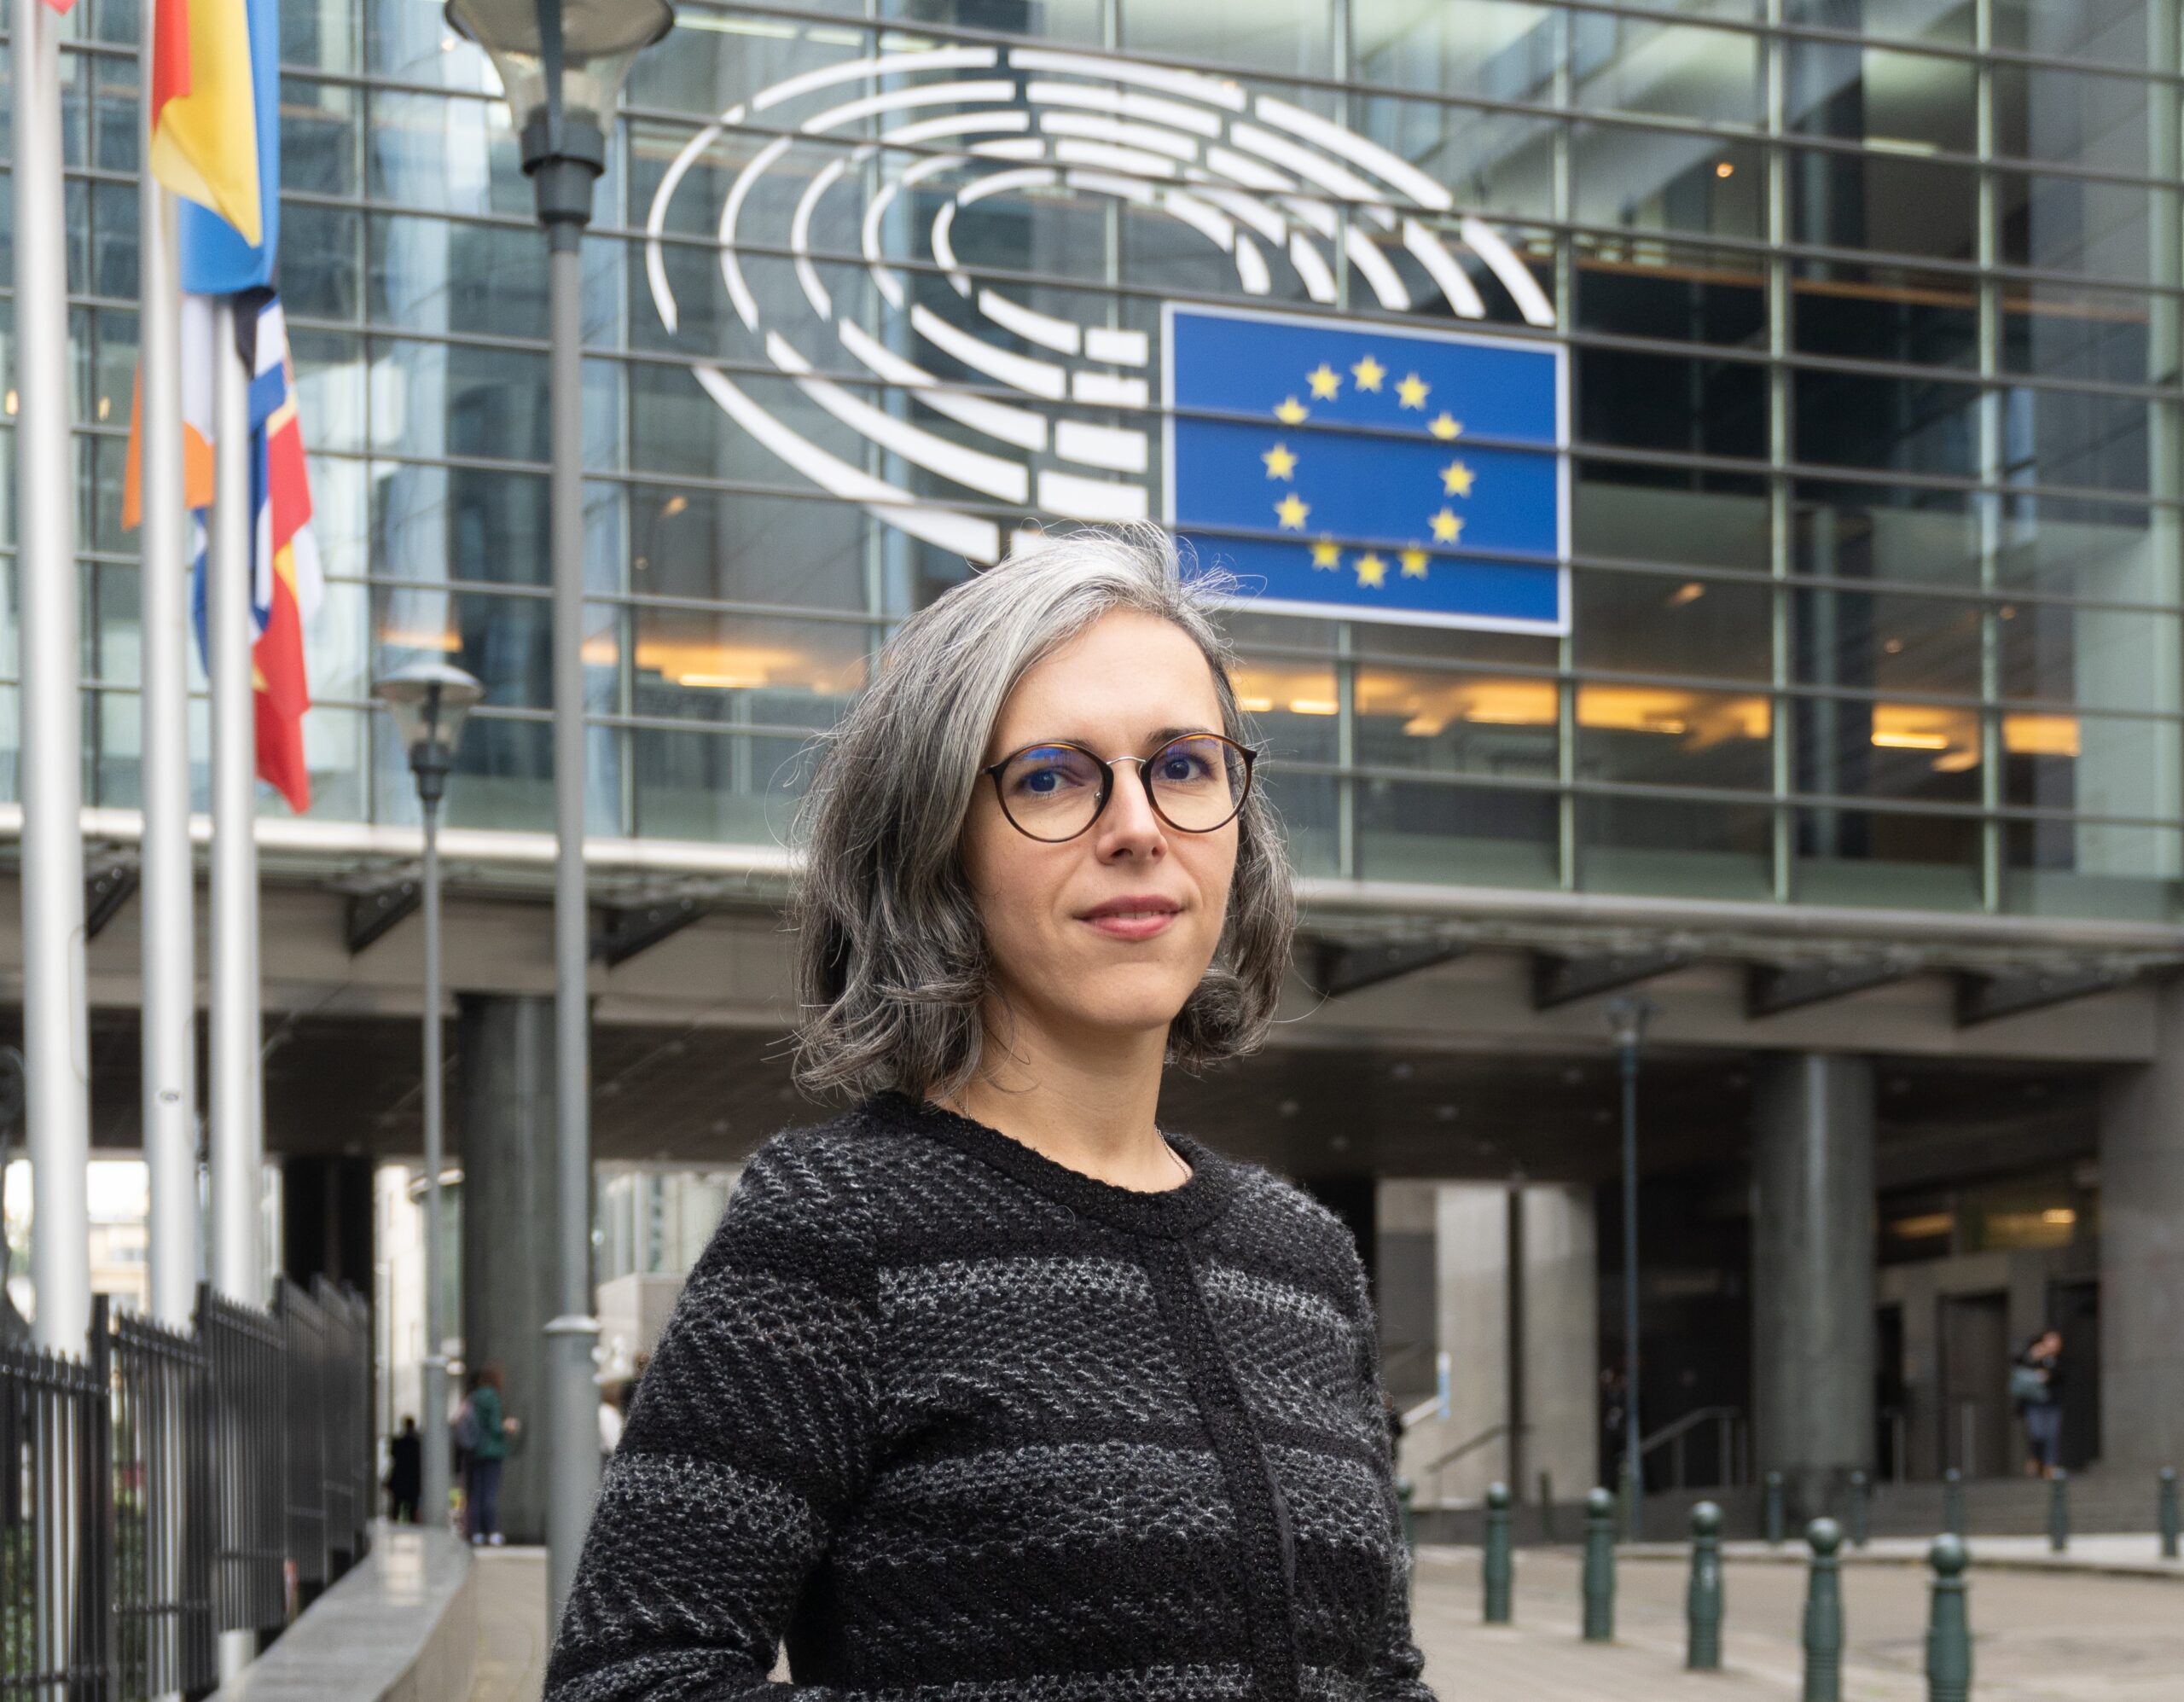 Adina Portaru before the European Parliament where climate change was blamed for the slaughter of Christians